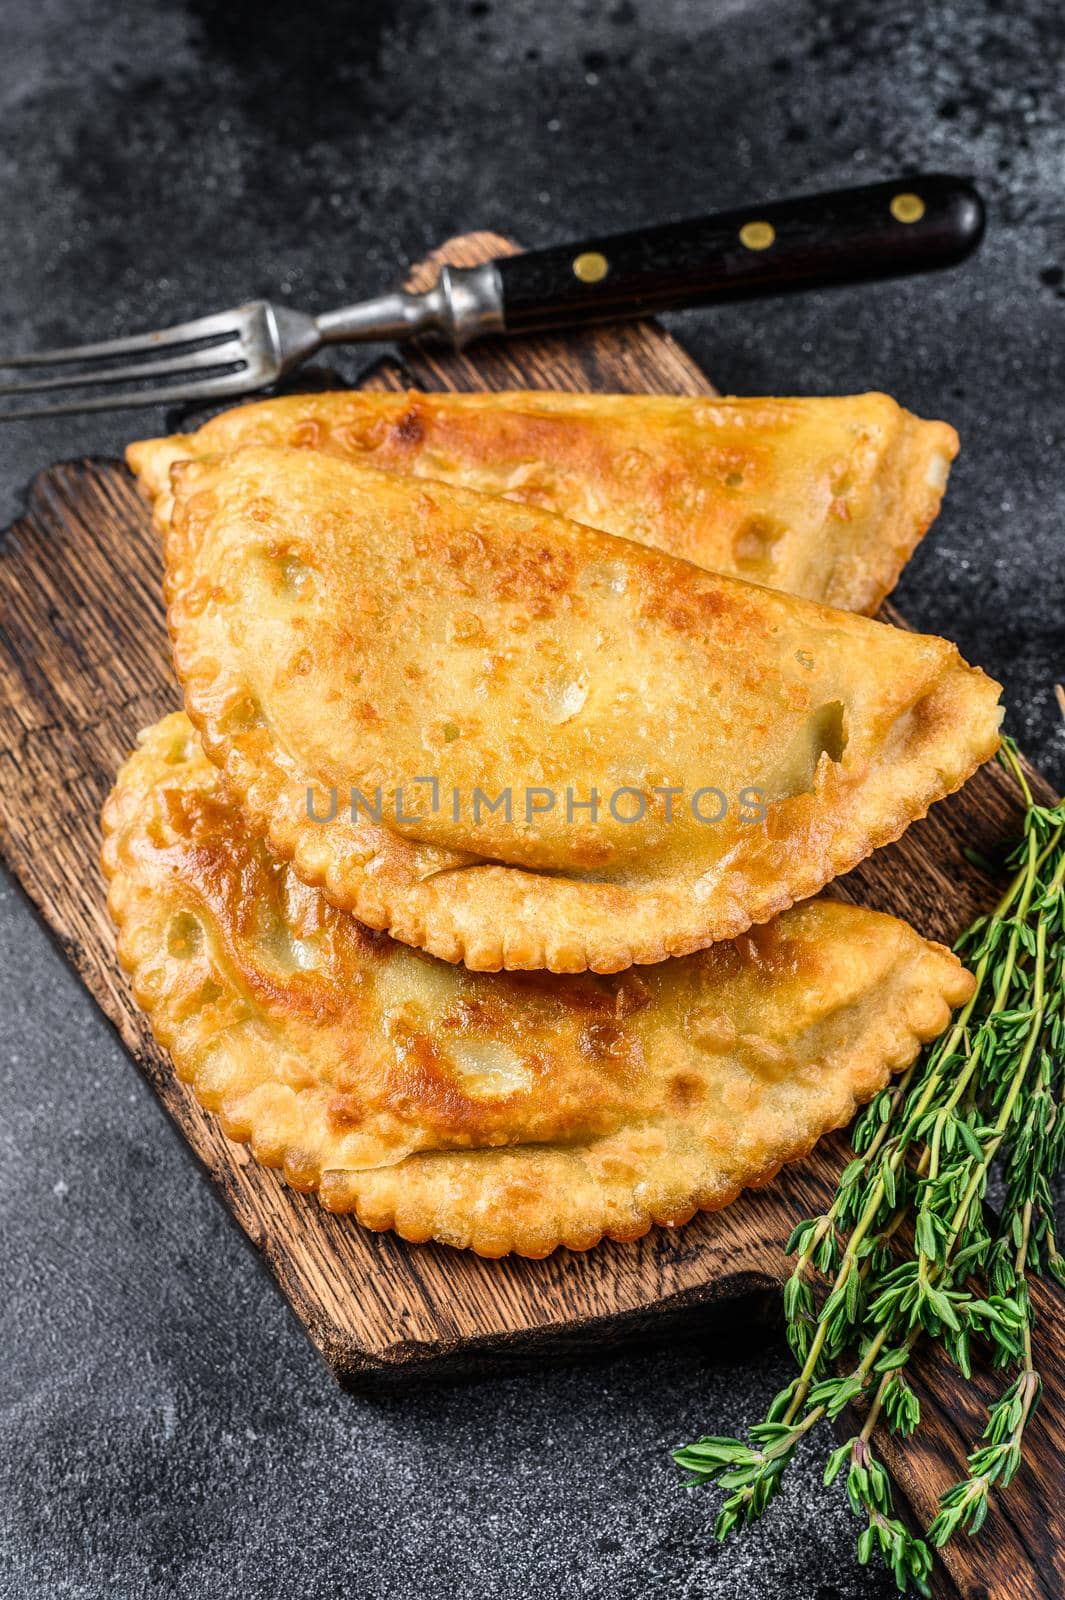 Fried in oil chebureks with meat and herbs, traditional Caucasian cuisine. Black background. Top view.